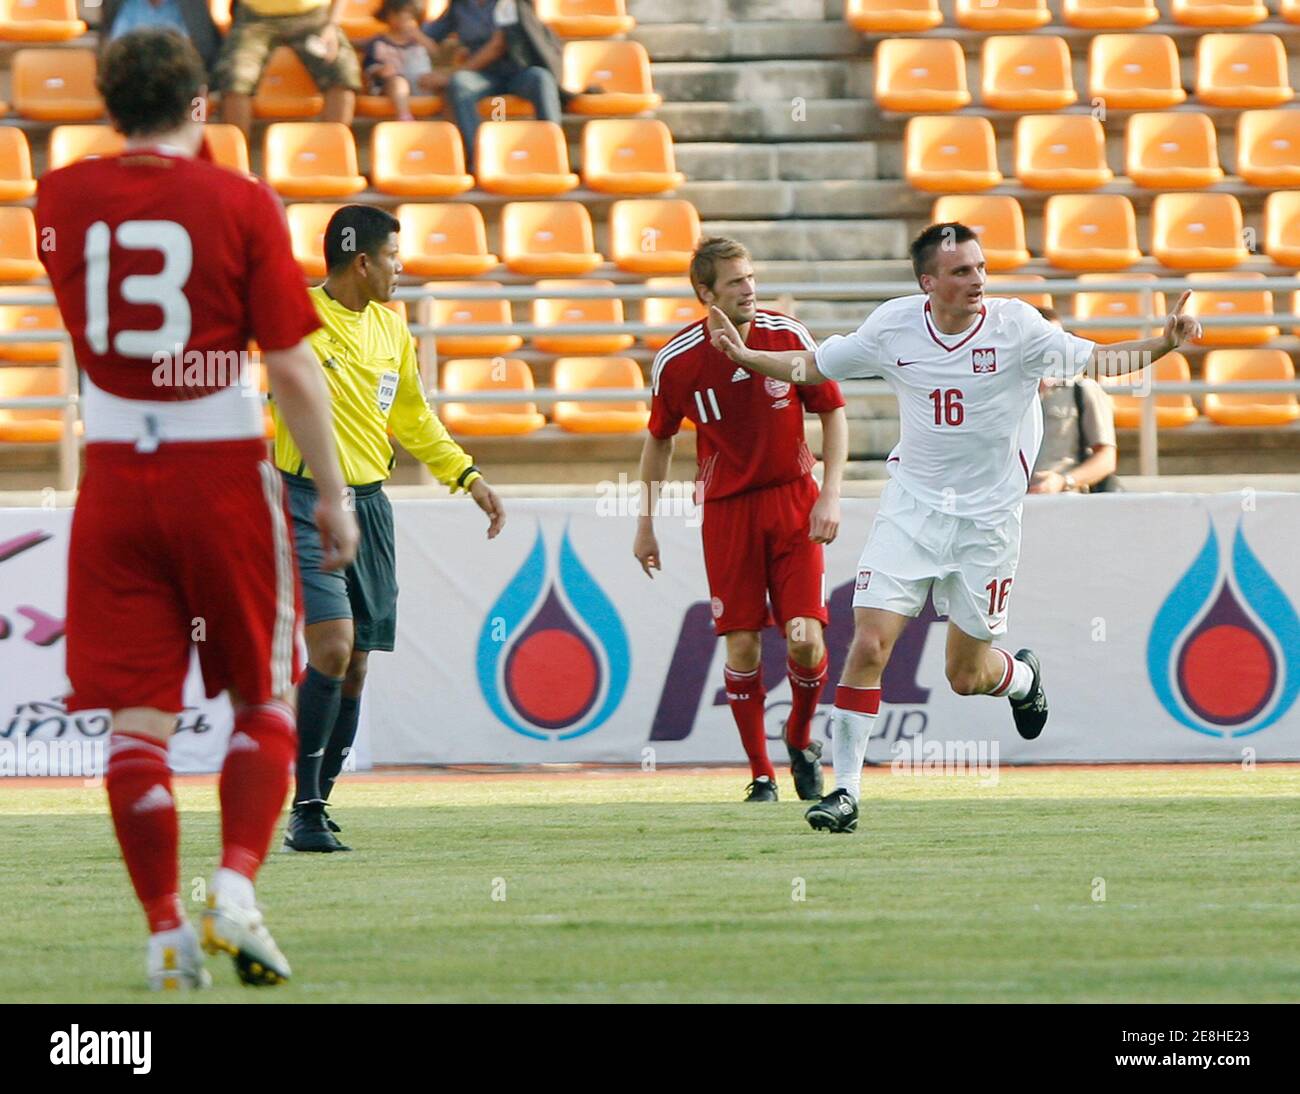 Poland's Slawomir Peszko (R) celebrates after scoring during their Thailand King's Cup football tournament against Denmark at His Majesty The 80th Birthday Anniversary stadium in Nakhon Ratchasima province northeast of Bangkok, January 17, 2010. REUTERS/Chaiwat Subprasom  (THAILAND - Tags: SPORT SOCCER) Stock Photo